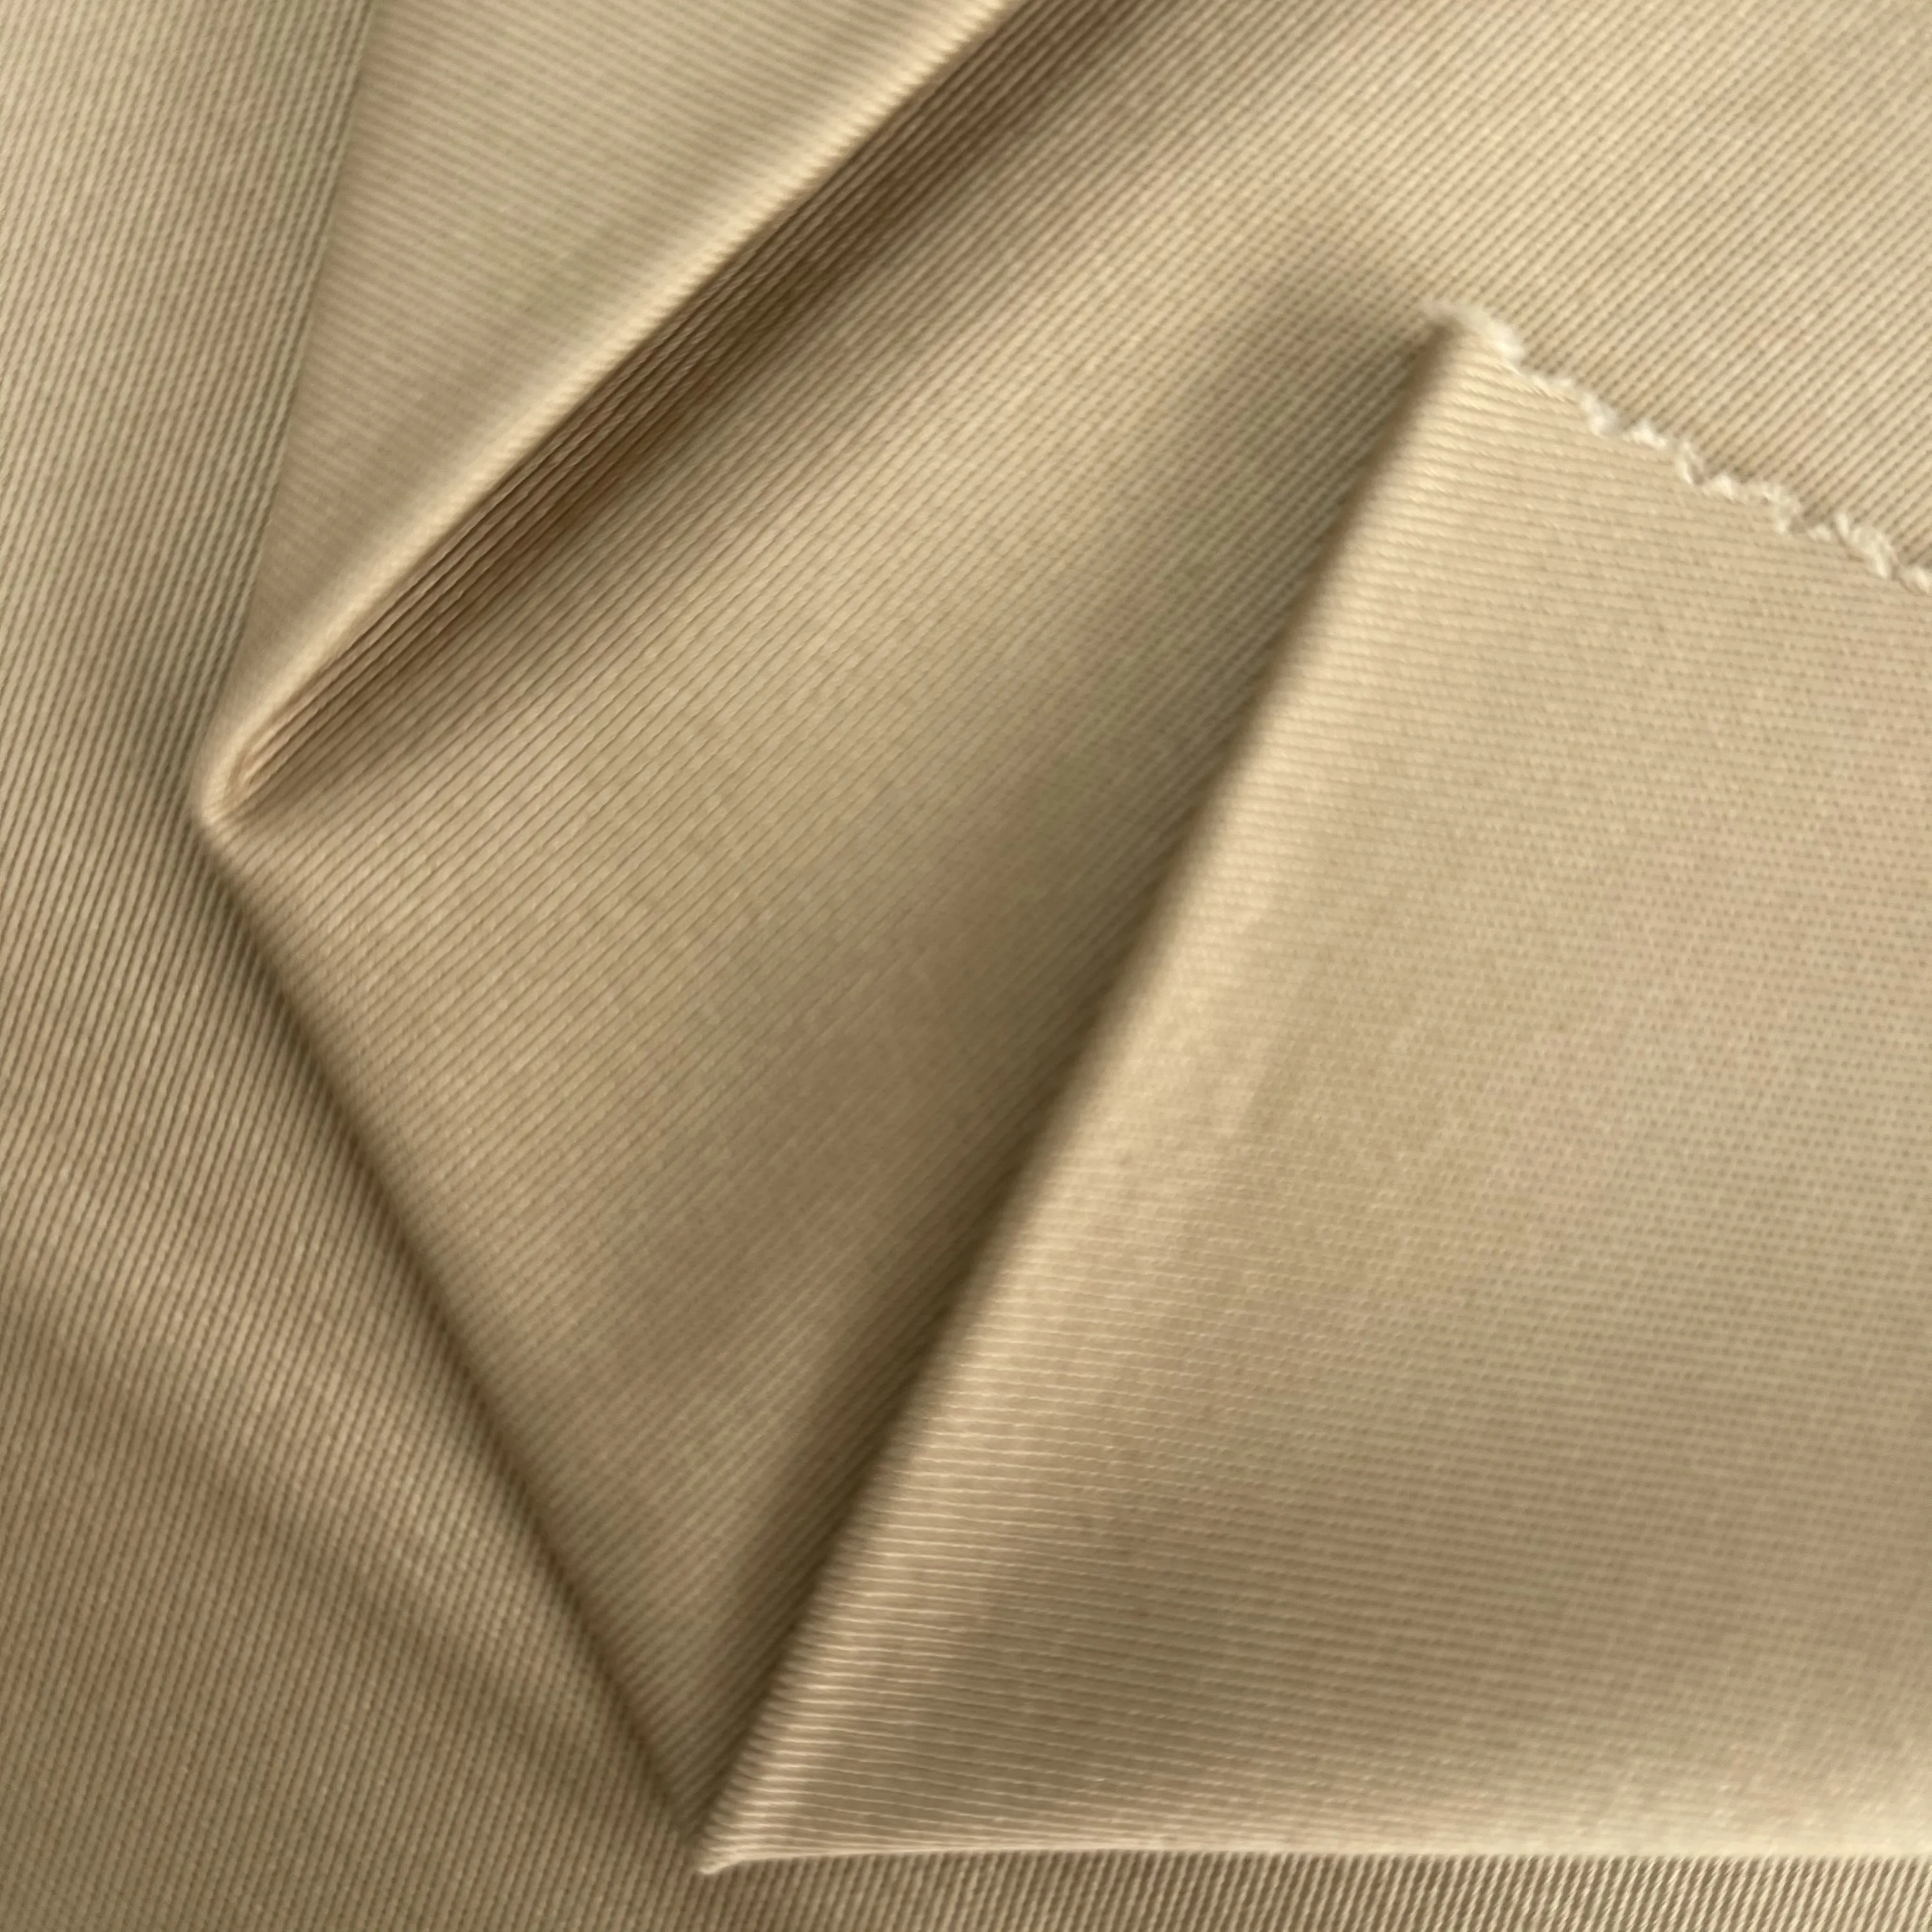 98% Cotton 2% Spandex organic chino twill cotton fabric textile fabrics and textiles for clothing